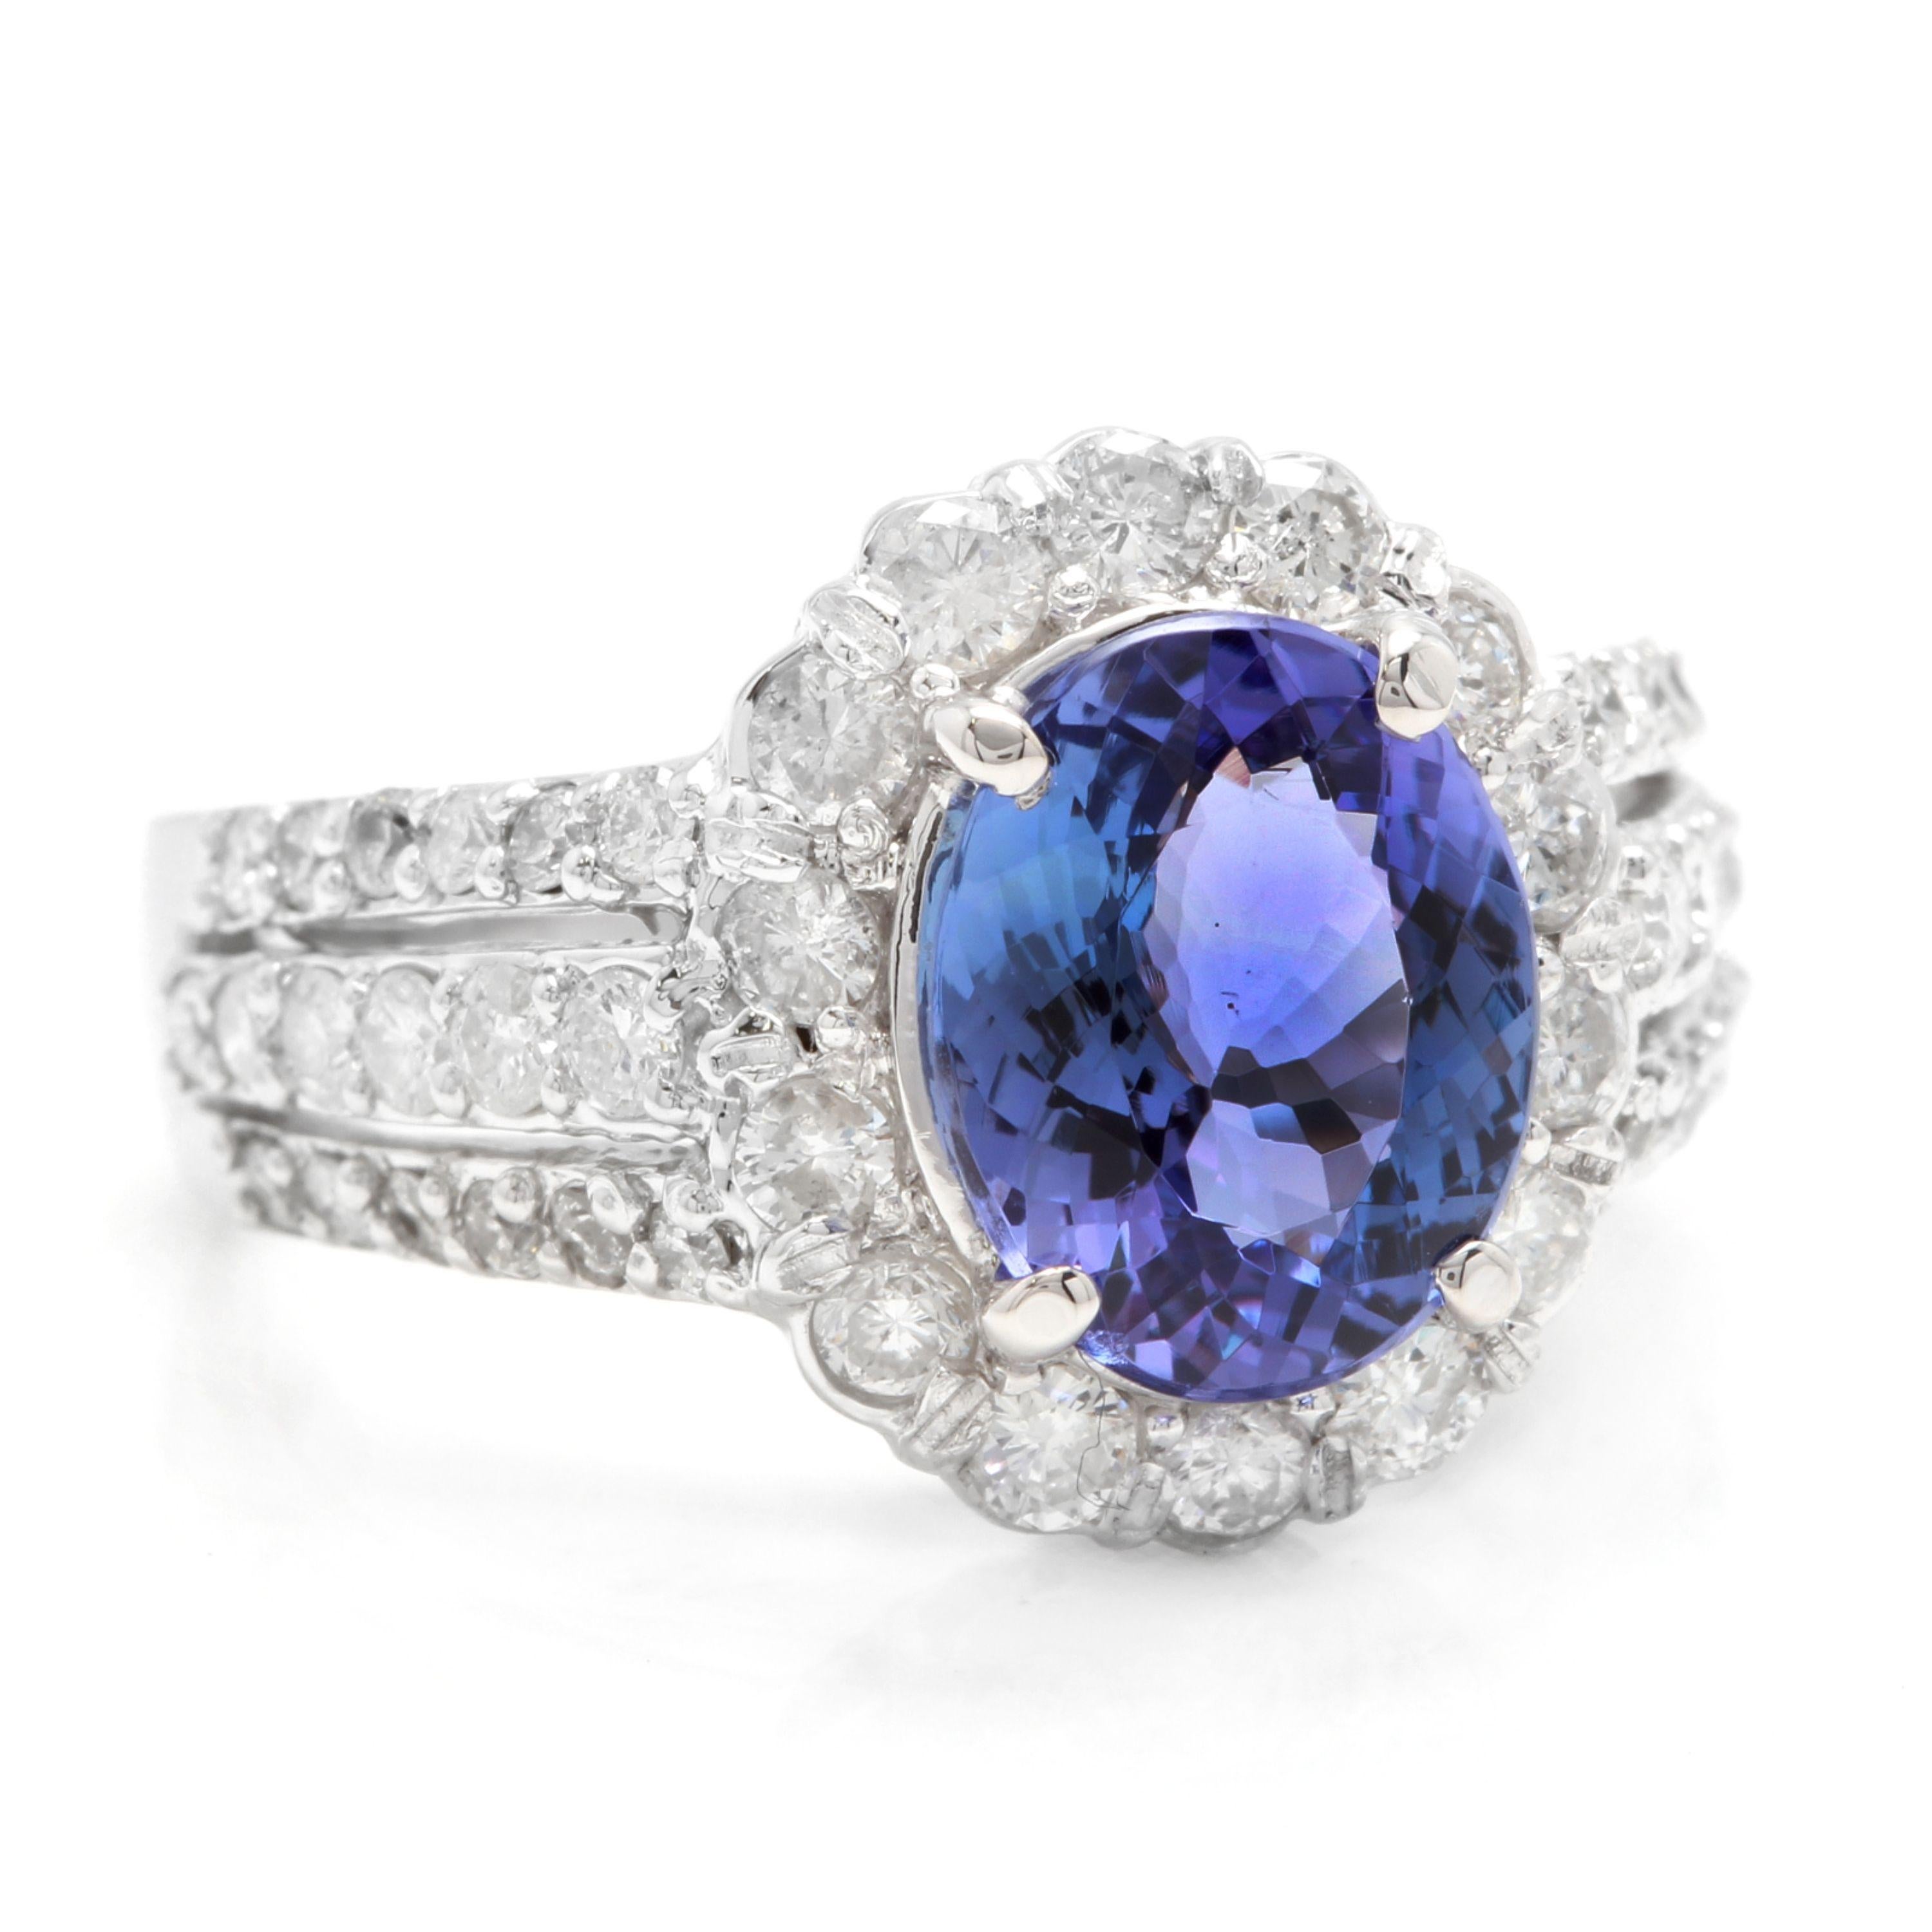 4.10 Carats Natural Very Nice Looking Tanzanite and Diamond 14K Solid White Gold Ring

Total Natural Oval Cut Tanzanite Weight is: Approx. 2.90 Carats

Tanzanite Measures: Approx. 9.00 x 7.00mm

Natural Round Diamonds Weight: Approx. 1.20 Carats